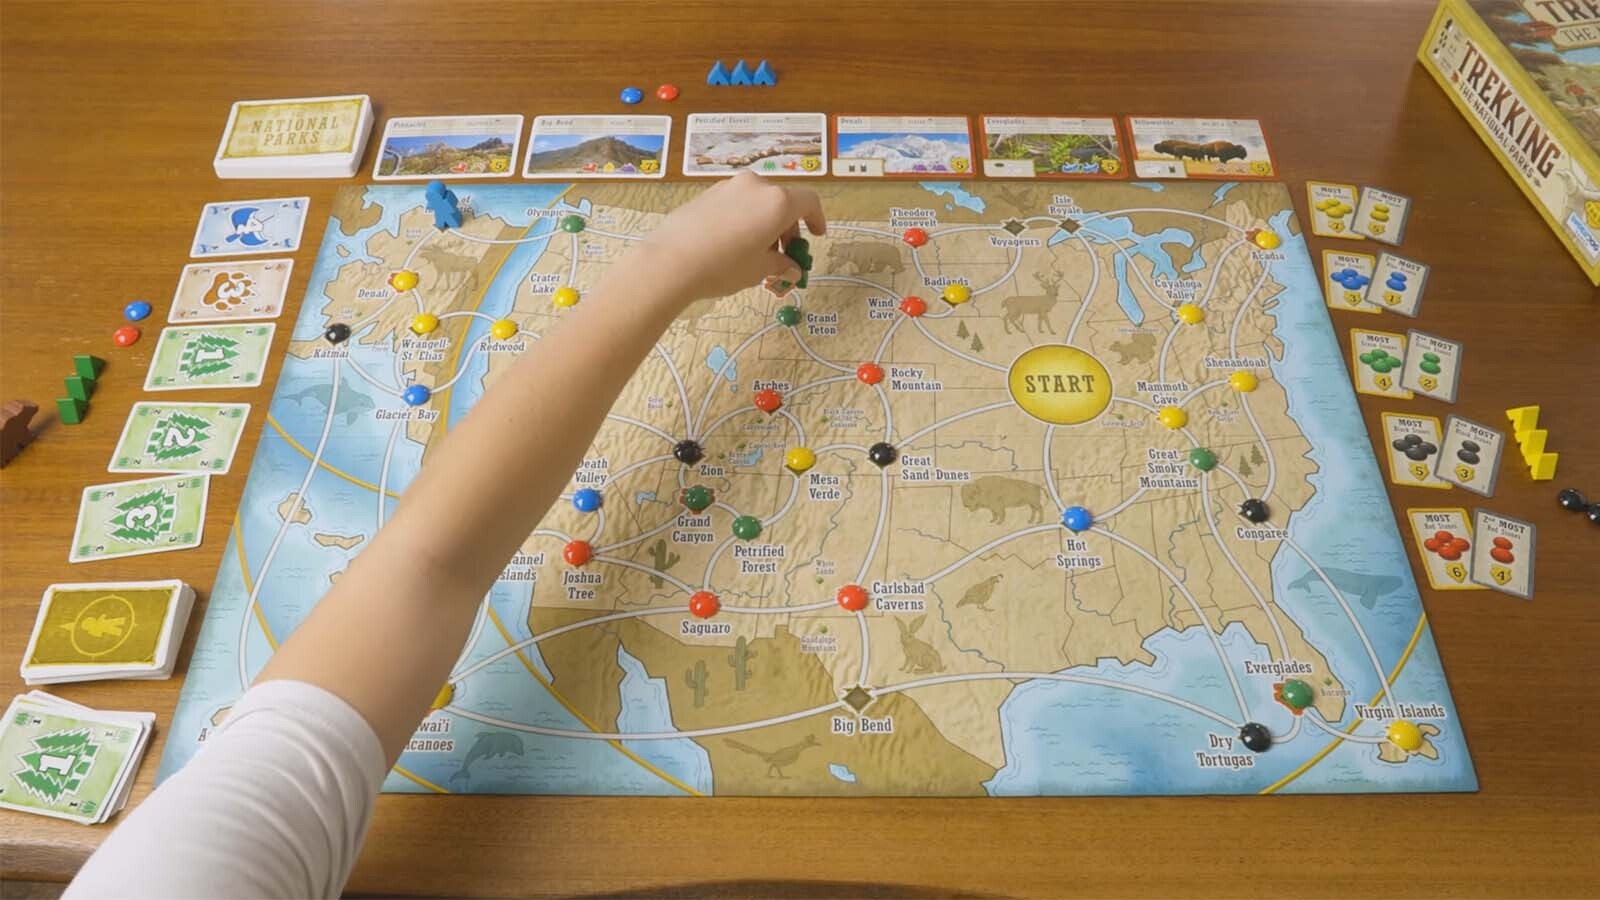 A player moves through Yellowstone on the Trekking the National Parks board game layout.